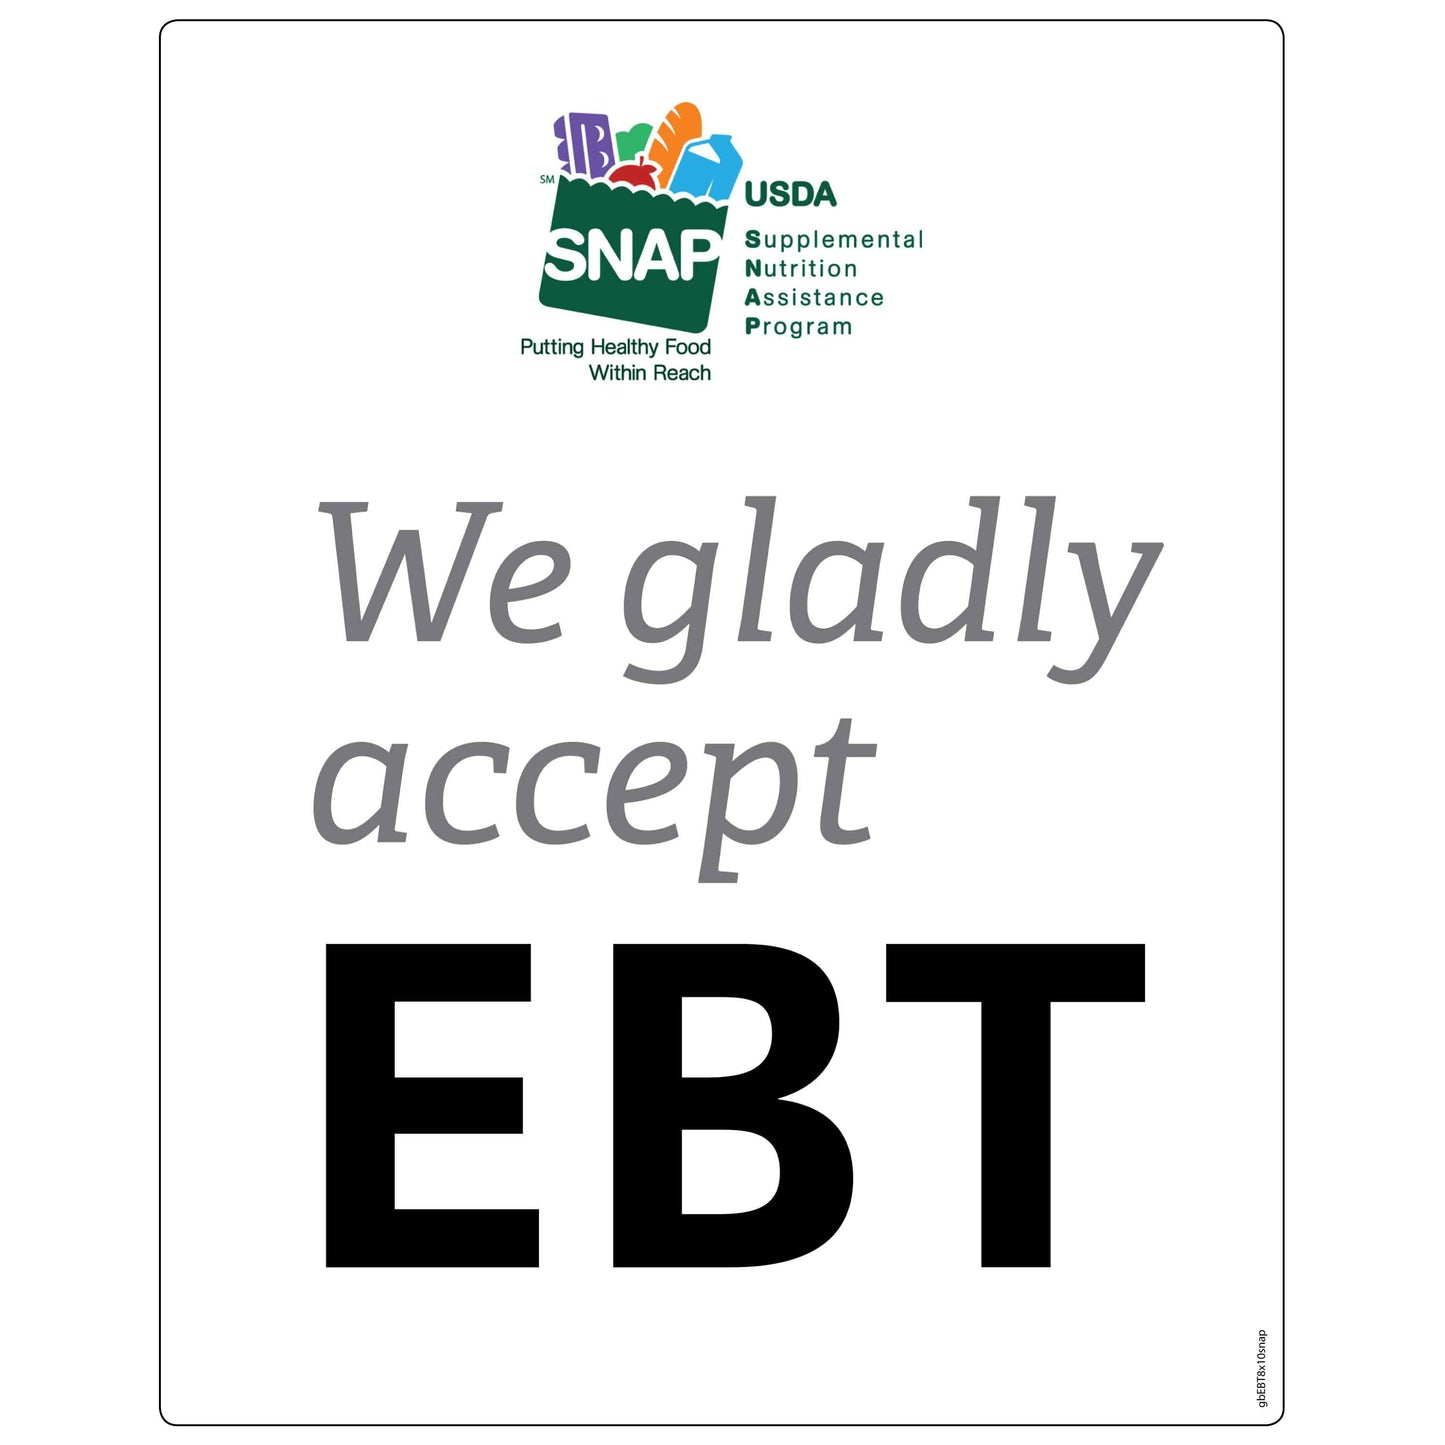 Gladly Accept EBT Decal. 8 inches by 10 inches in size.